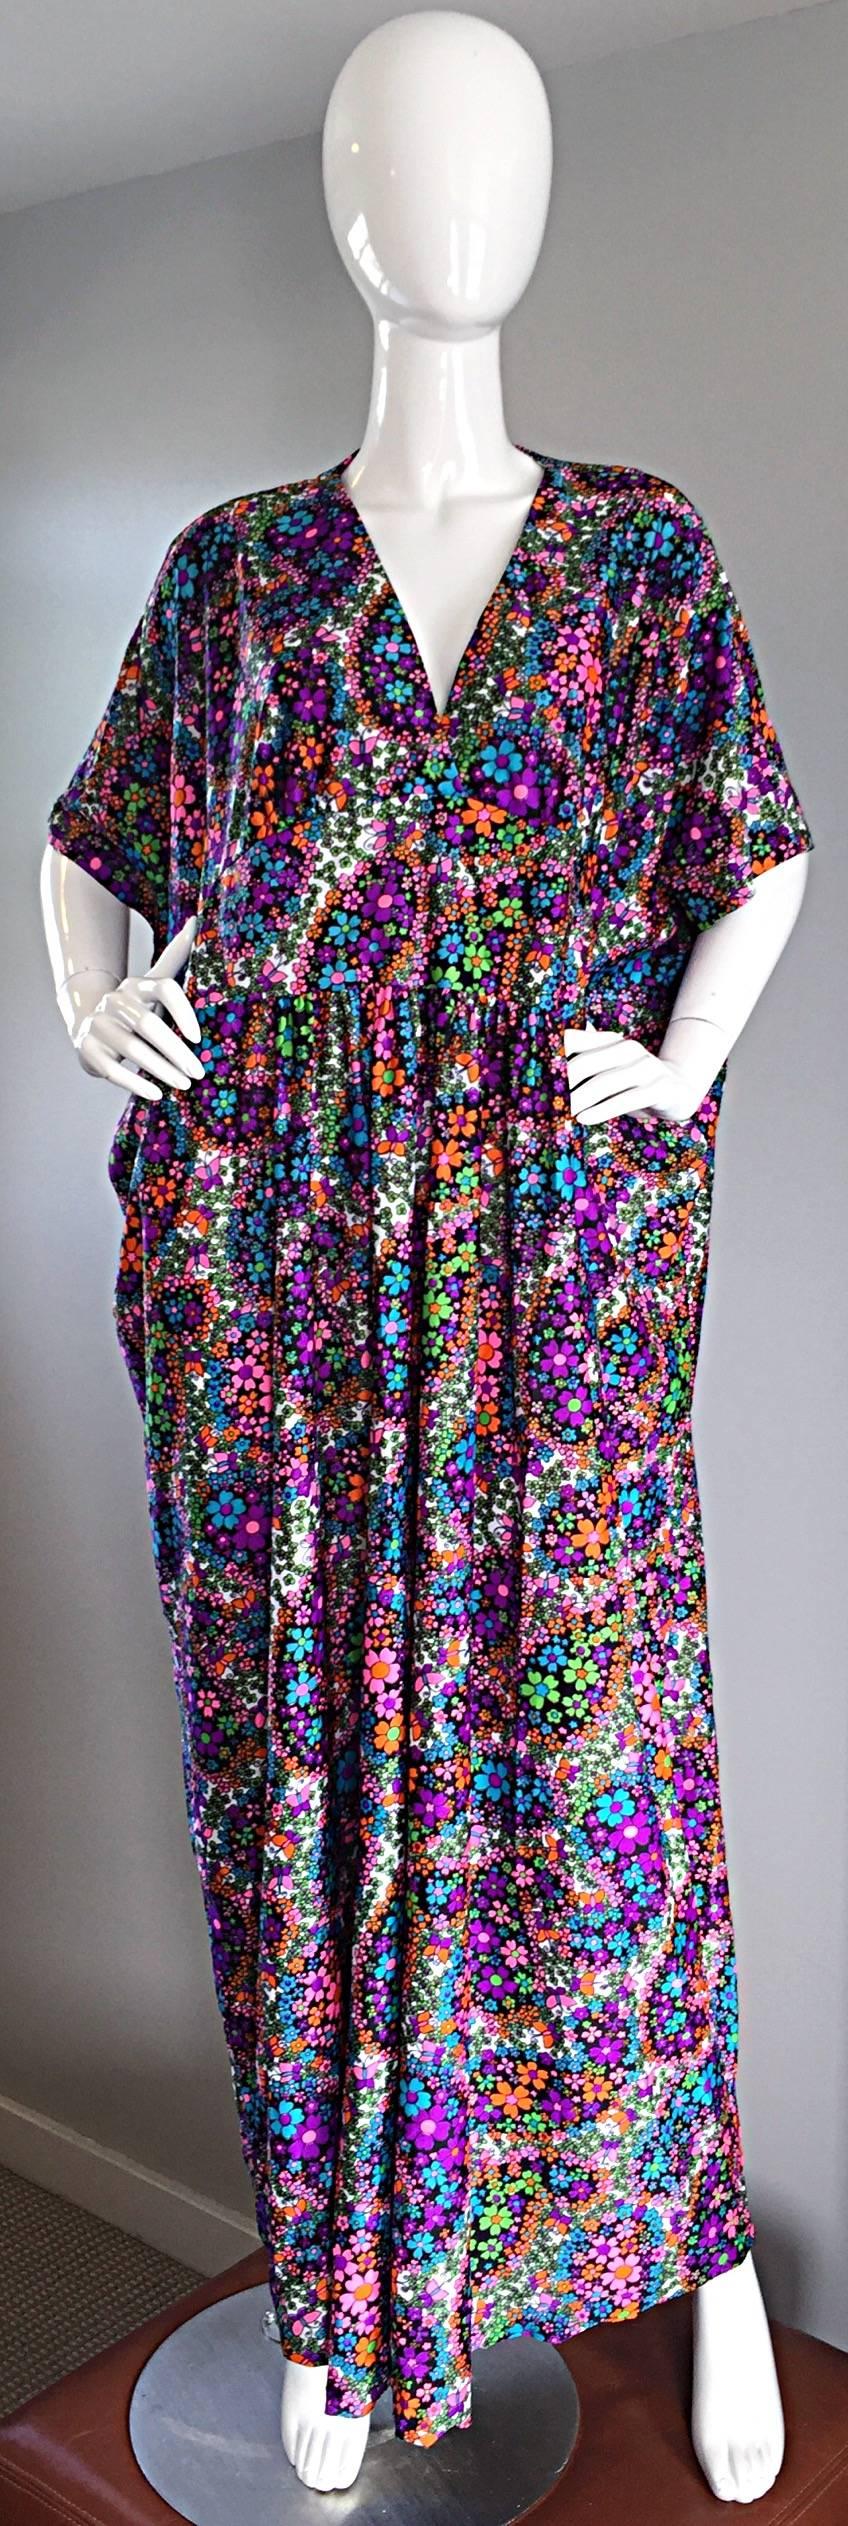 Incredible vintage 70s caftan / kaftan! Pretty much every color of the rainbow are included in this beauty, which feature flowers and butterflies throughout. Perfect by itself, or great as a swimsuit cover-up. A definite MUST! In great condition.